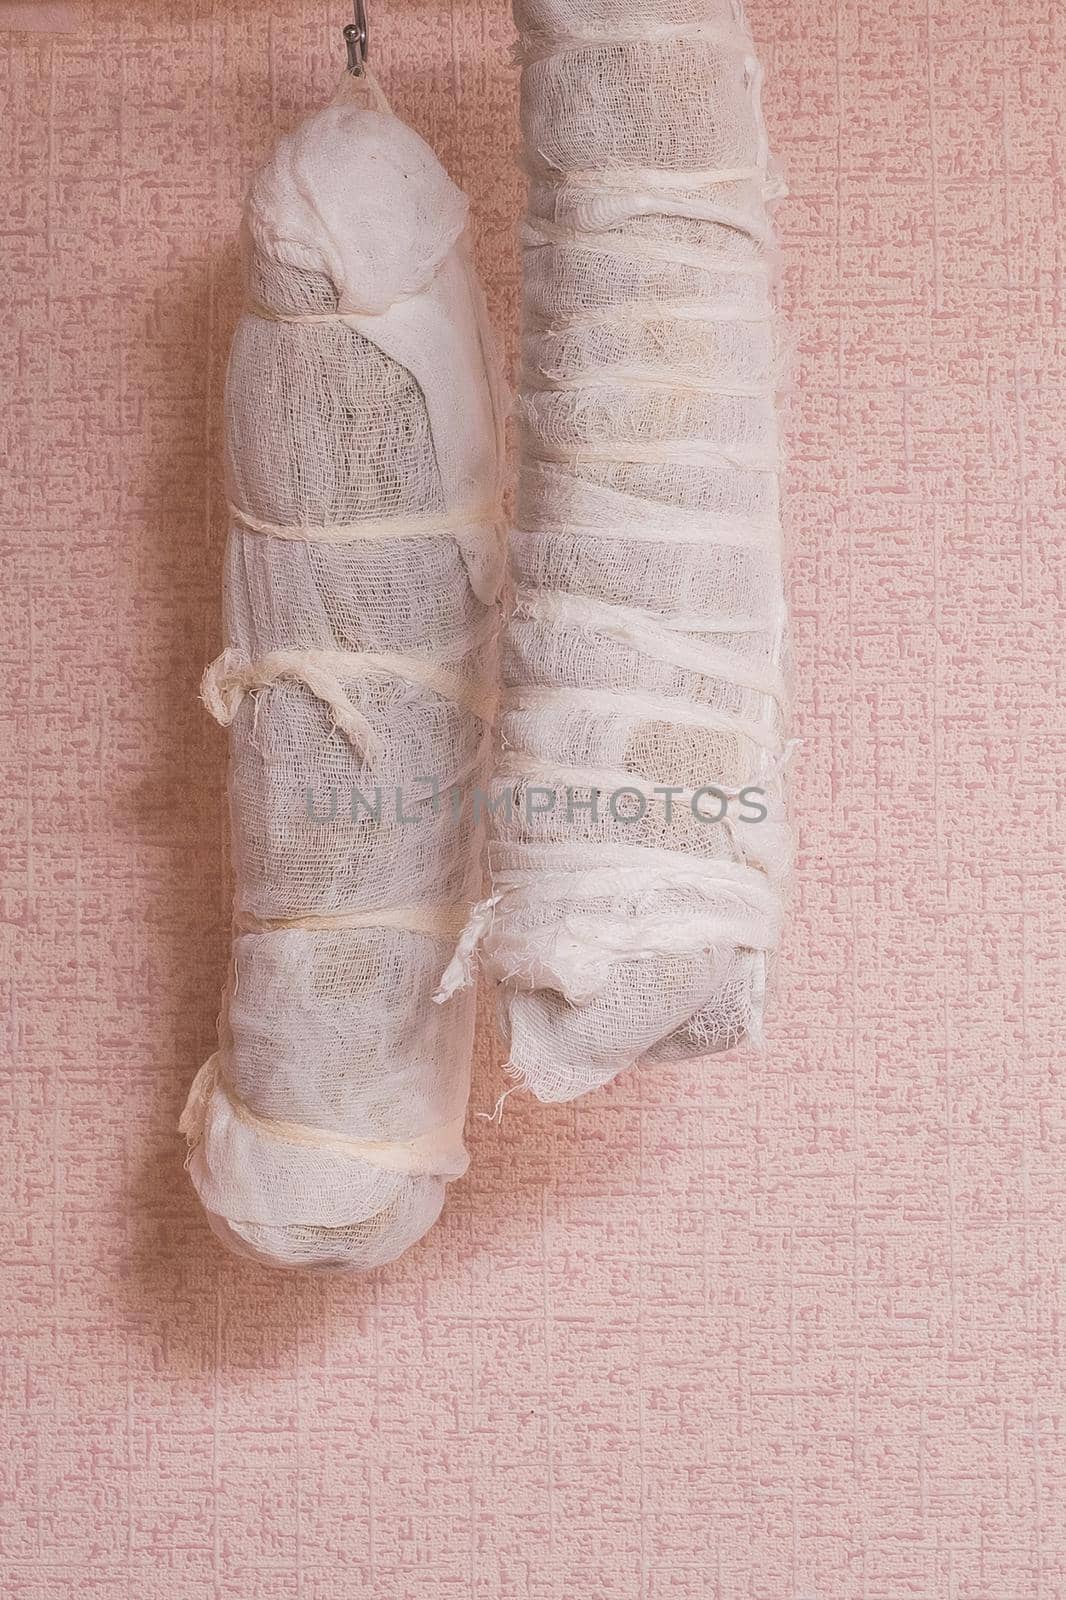 Pork loin, polendwitz wrapped in gauze and hung for drying by AYDO8